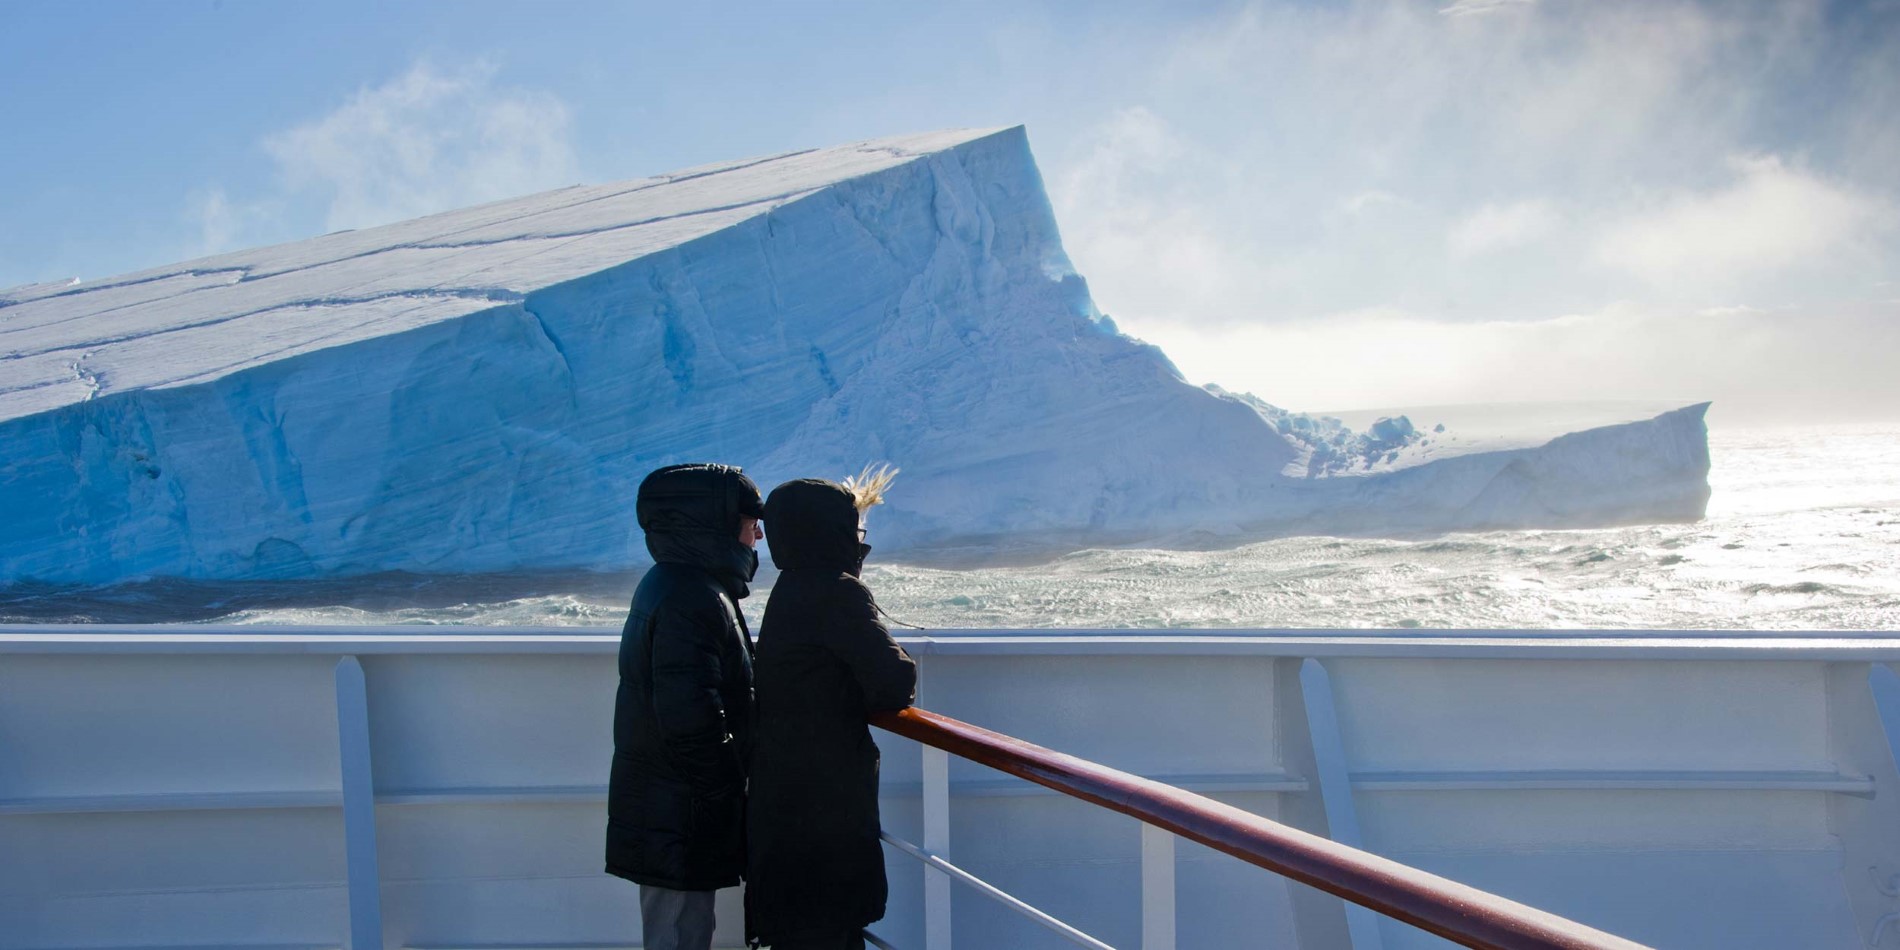 Enjoying the views in the Antarctic Sound